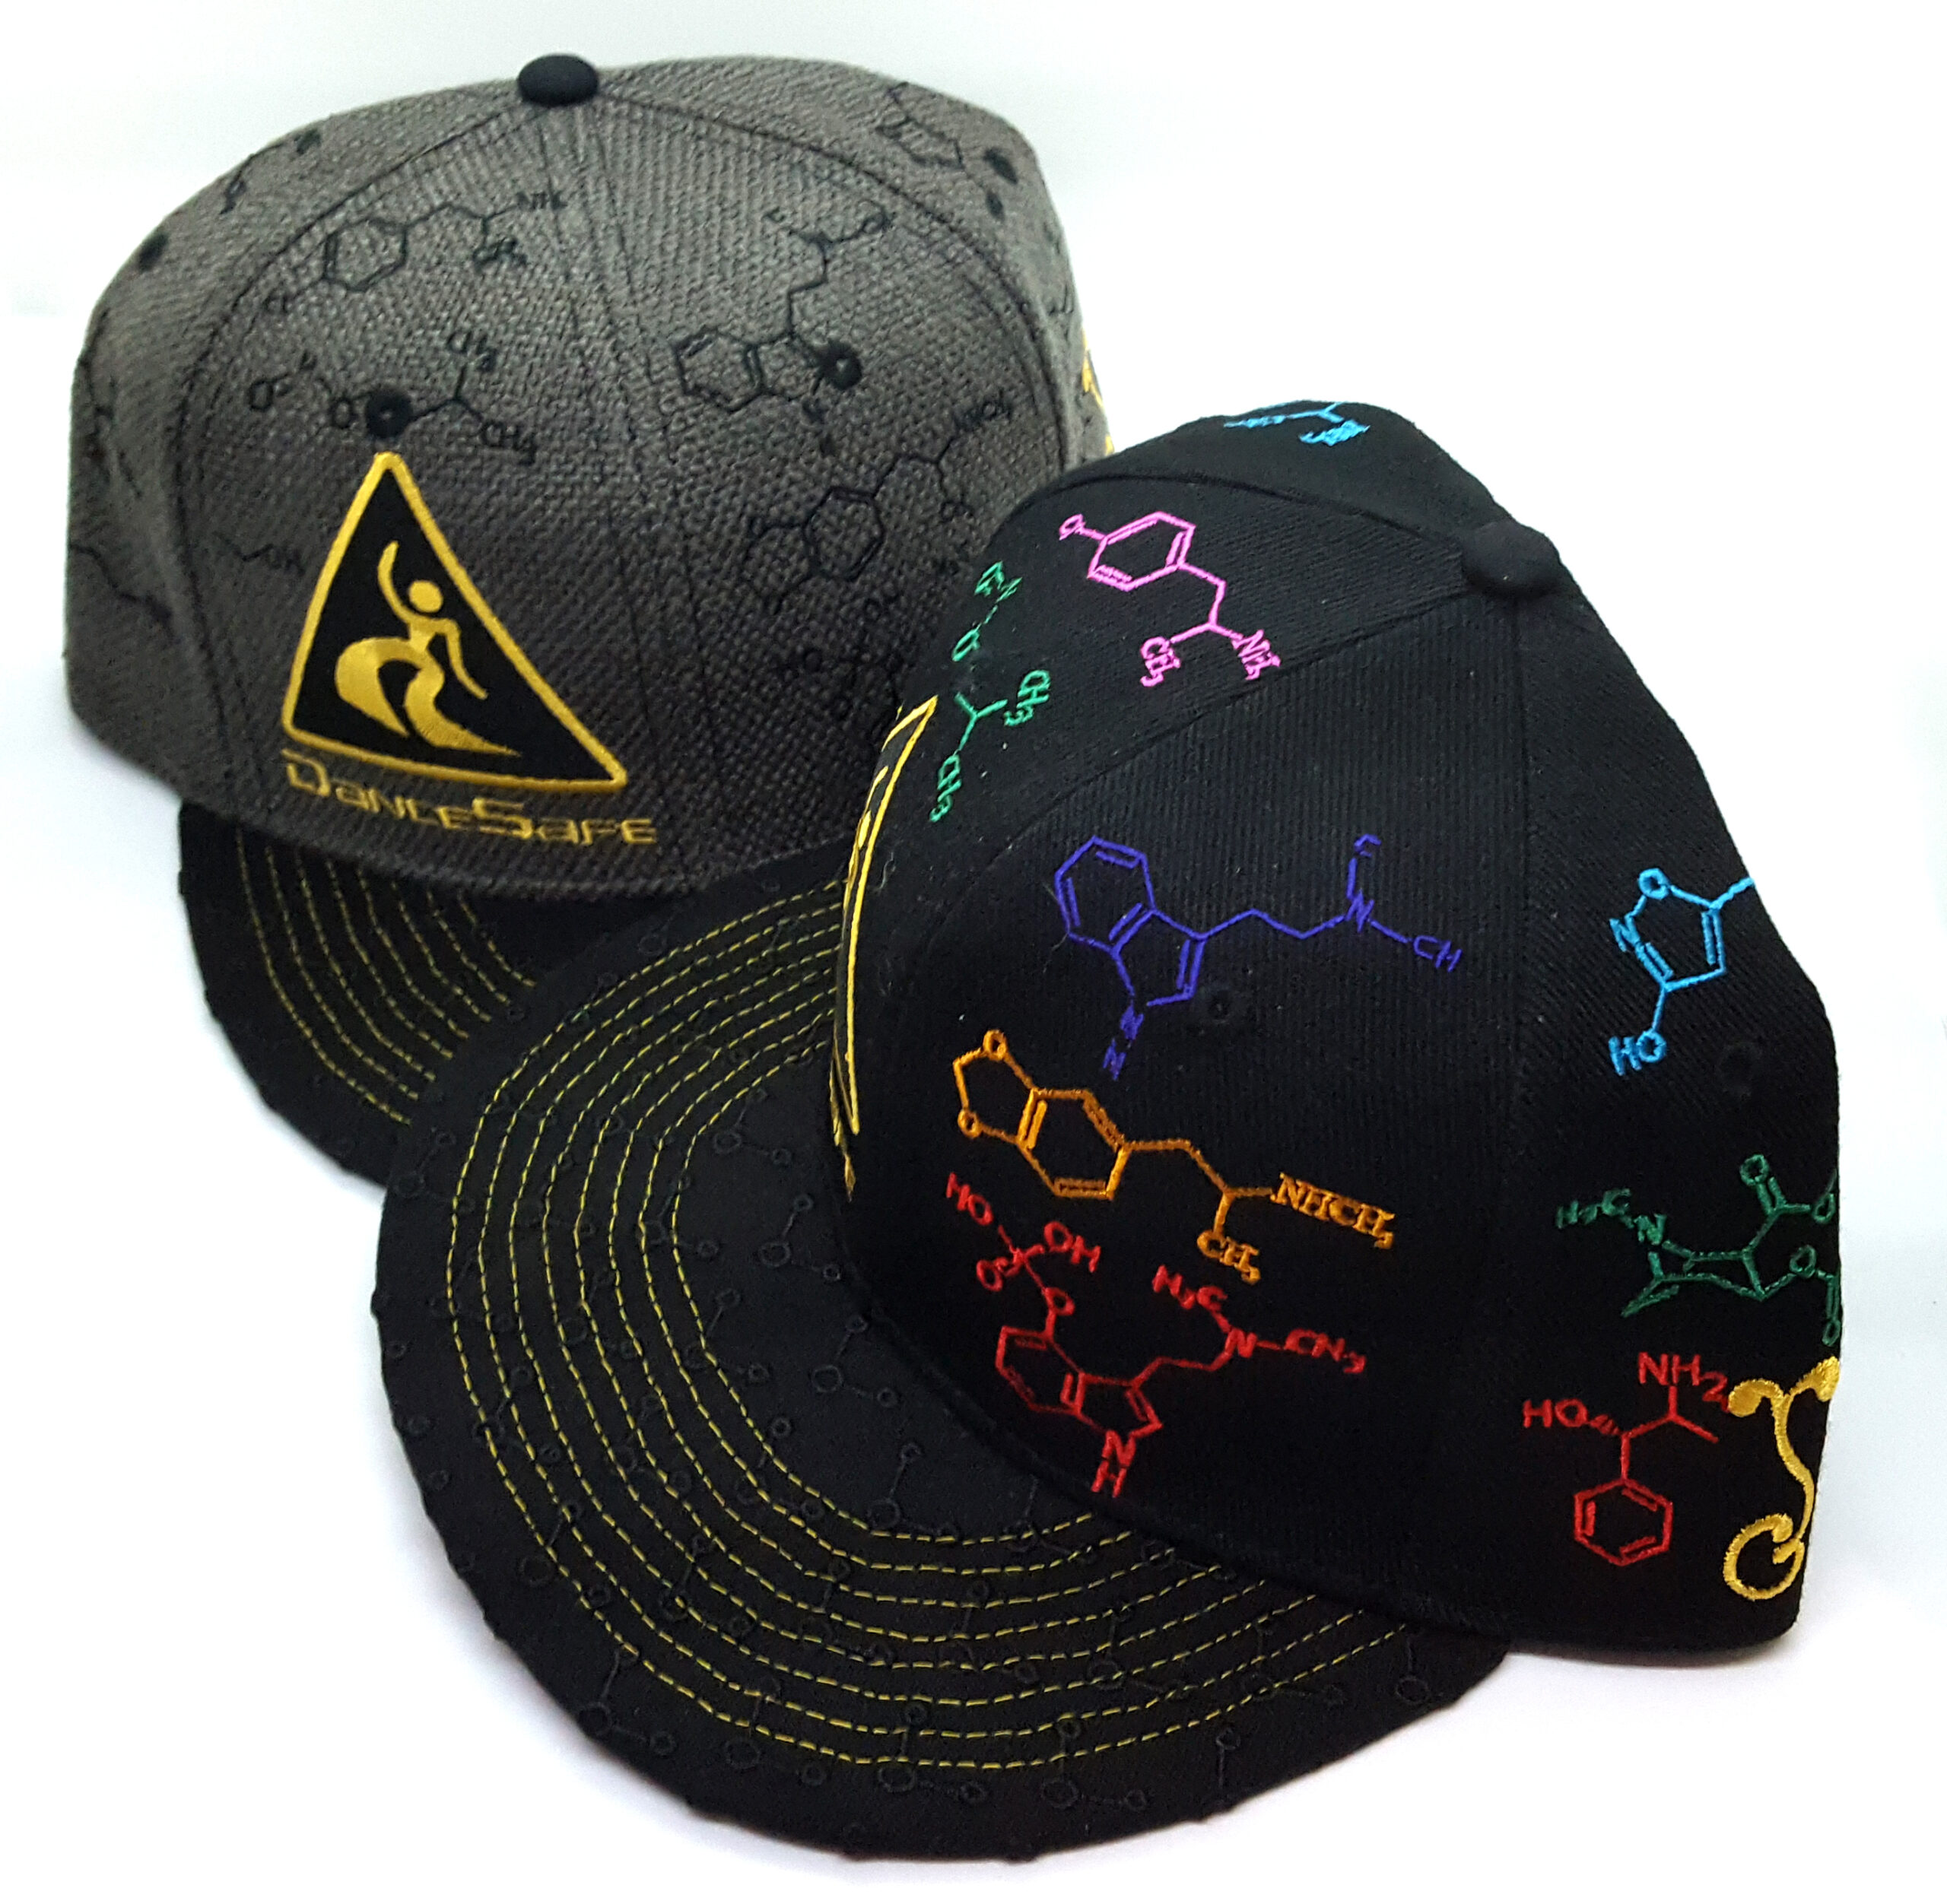 Two grey baseball caps with drug molecules and the old DanceSafe logo on them.